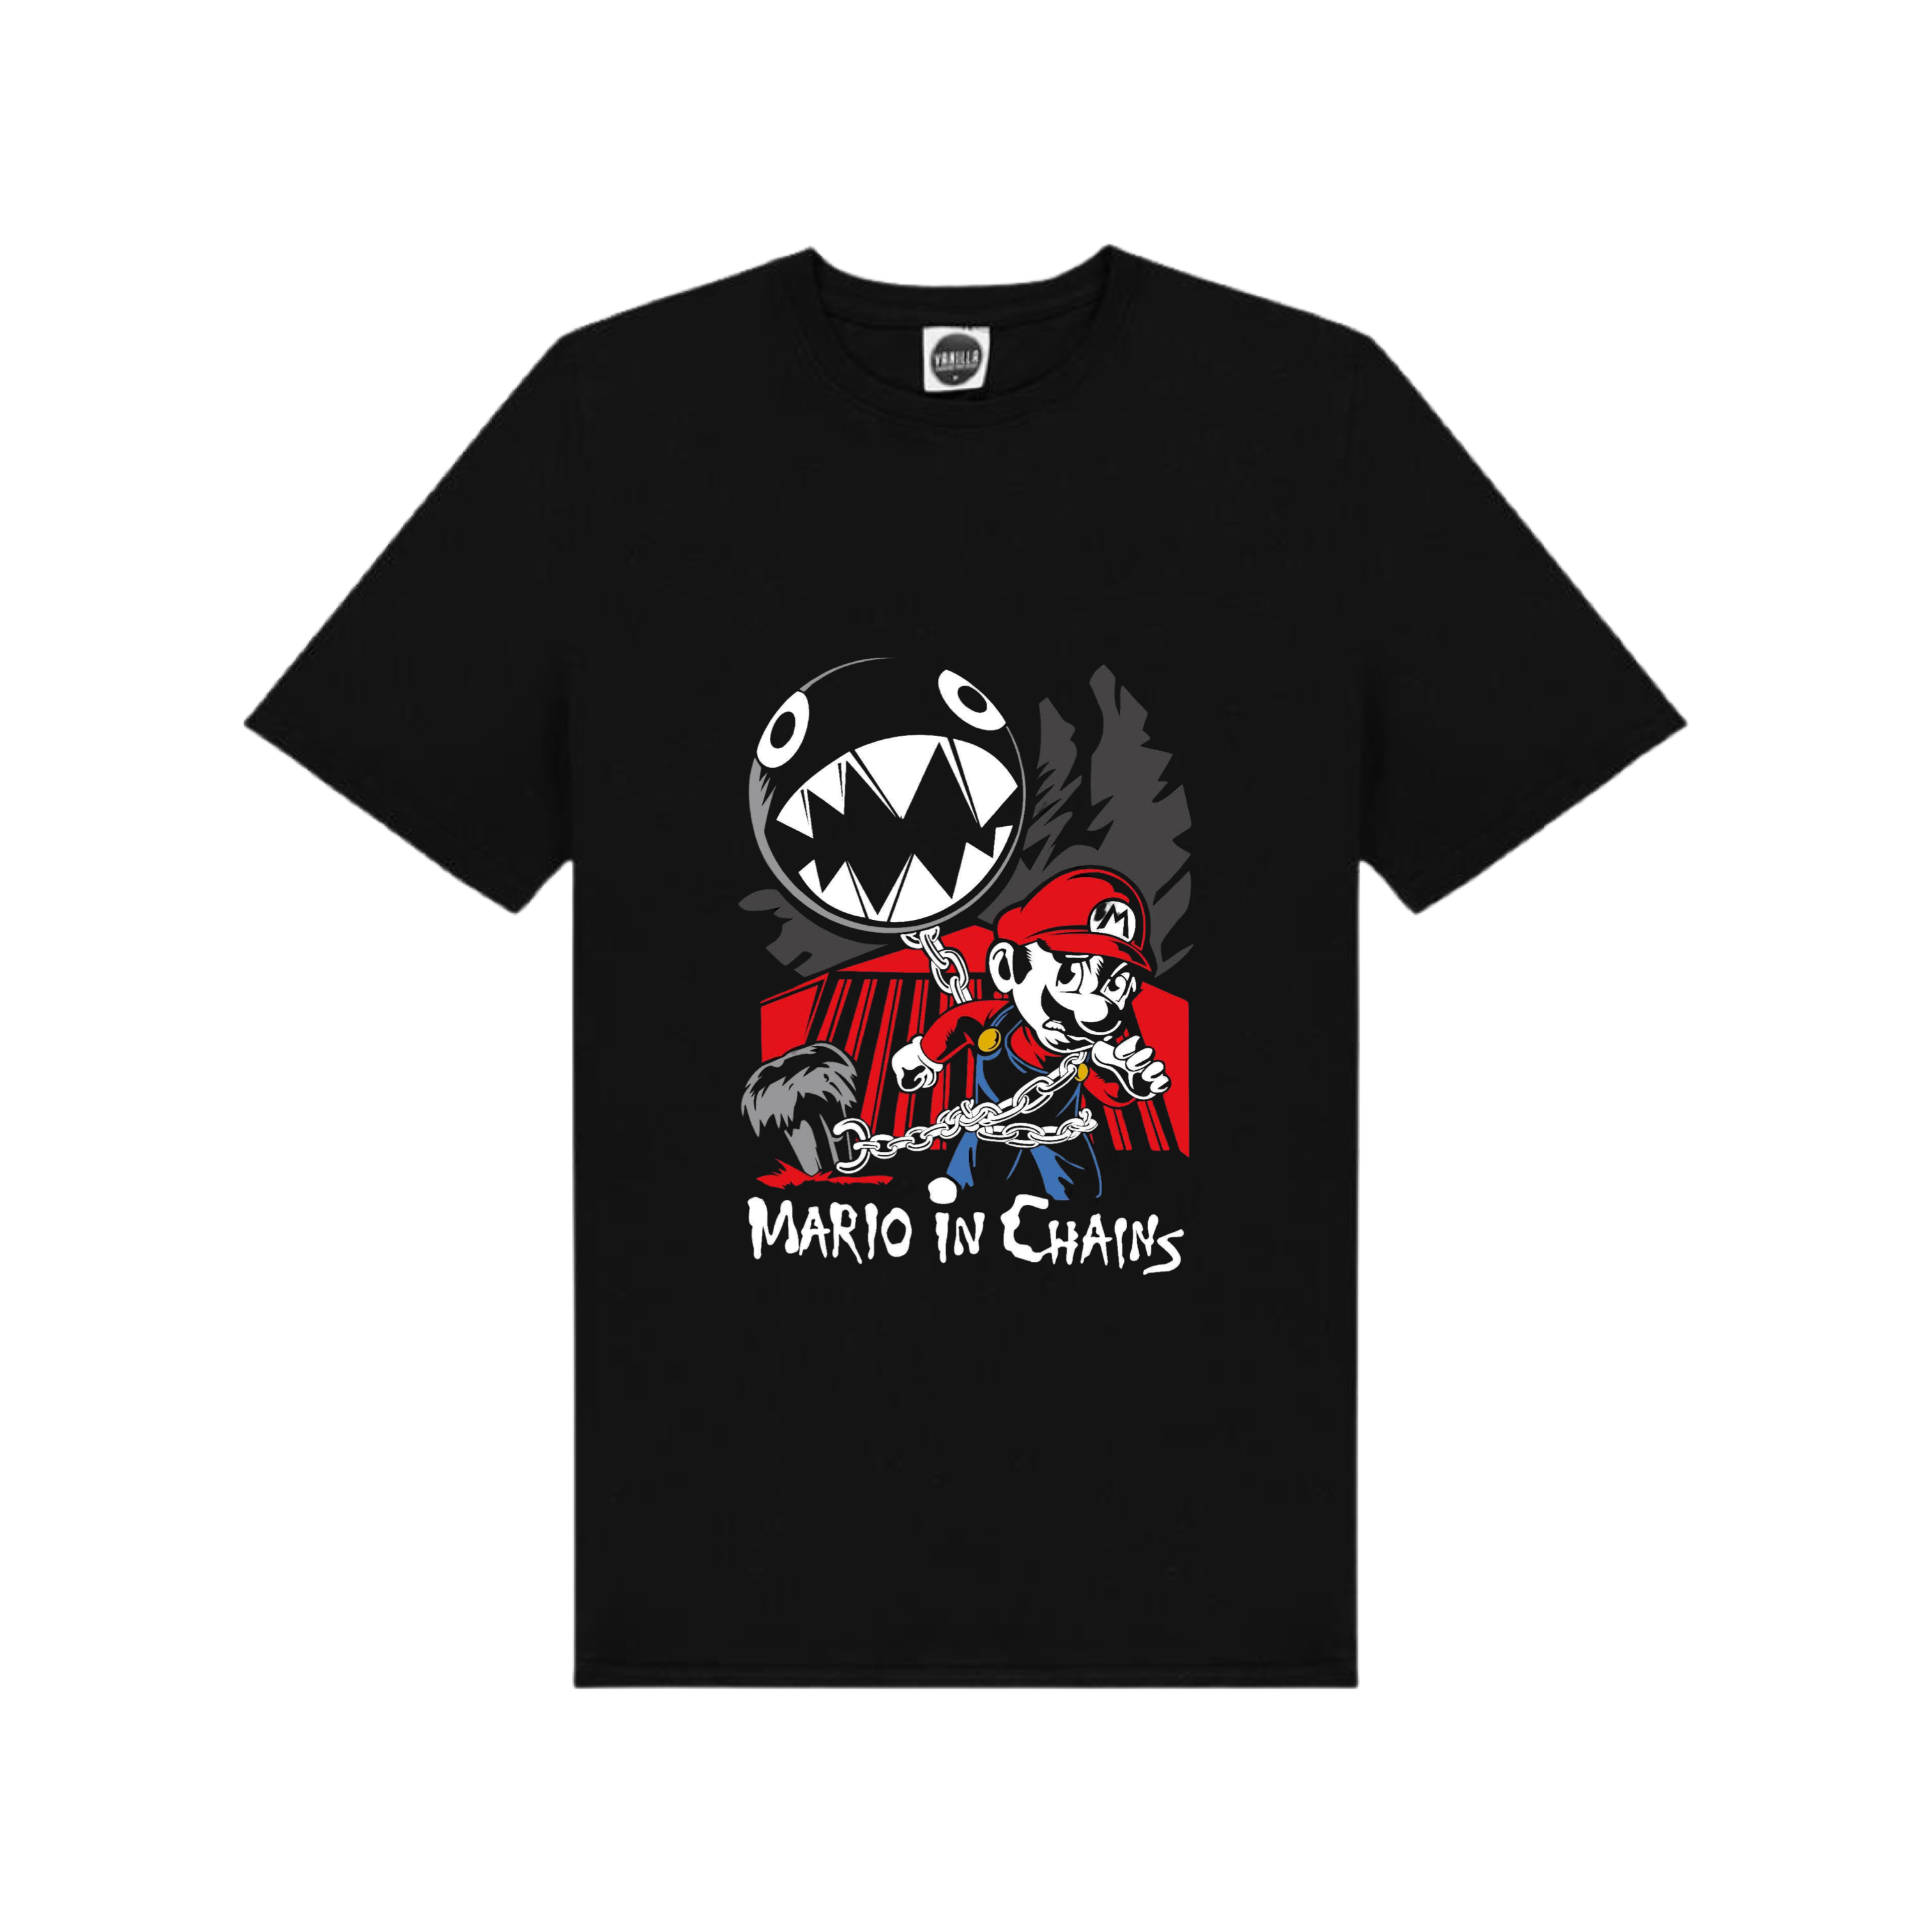 Super Mario In Chains Designed T-Shirt / Hoodie